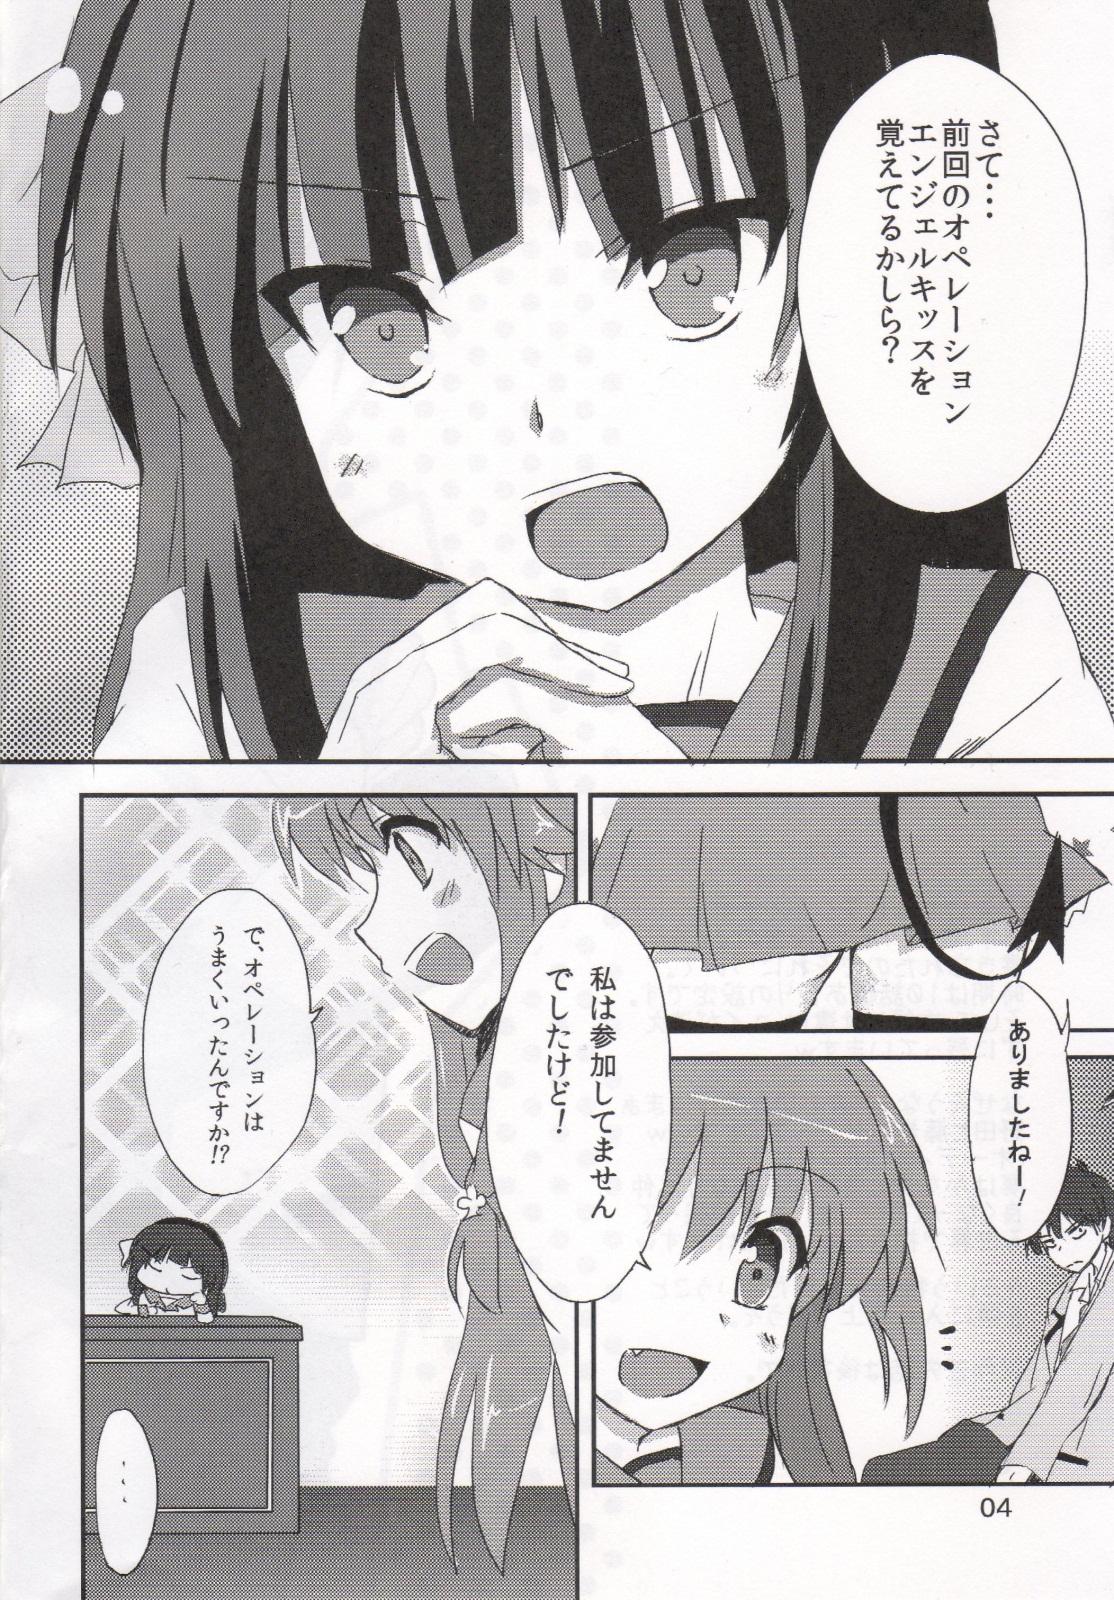 Cheating My Heart is yours! ver.2♪ - Angel beats Ecuador - Page 3